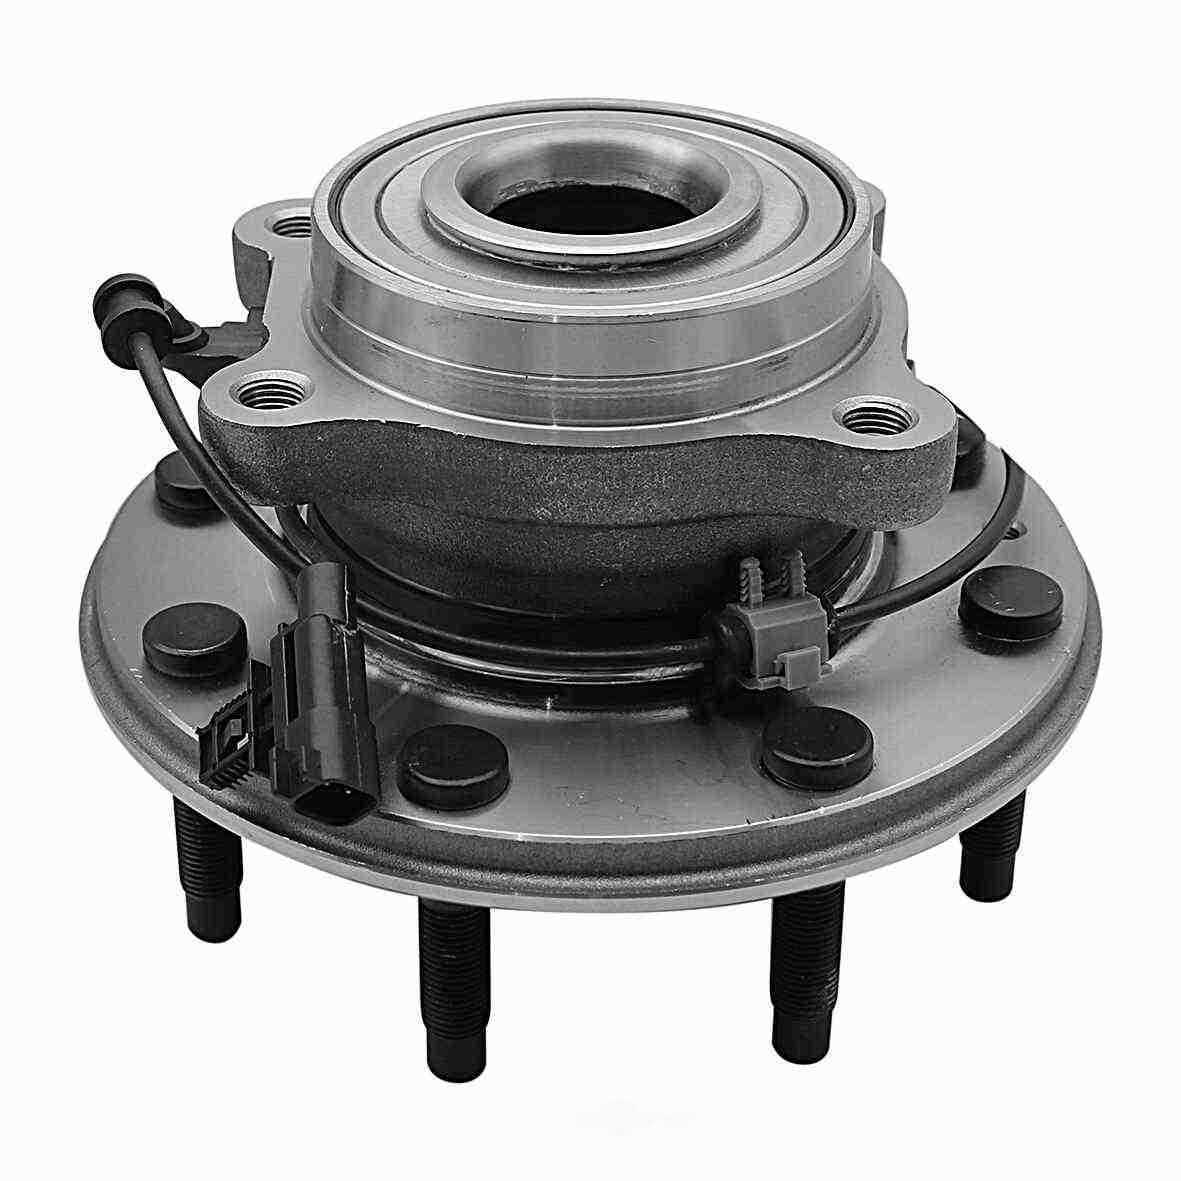 GSP NORTH AMERICA INC. - GSP New Wheel Bearing and Hub Assembly (Front) - AD8 106145